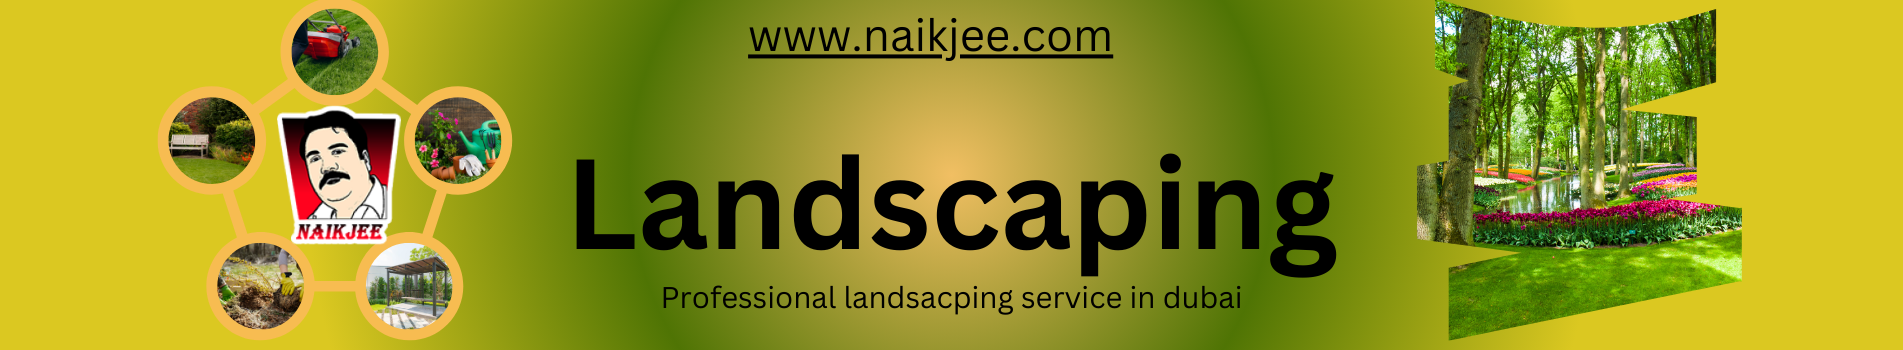 Professional Landscaping Services in Dubai and UAE - Naikjee